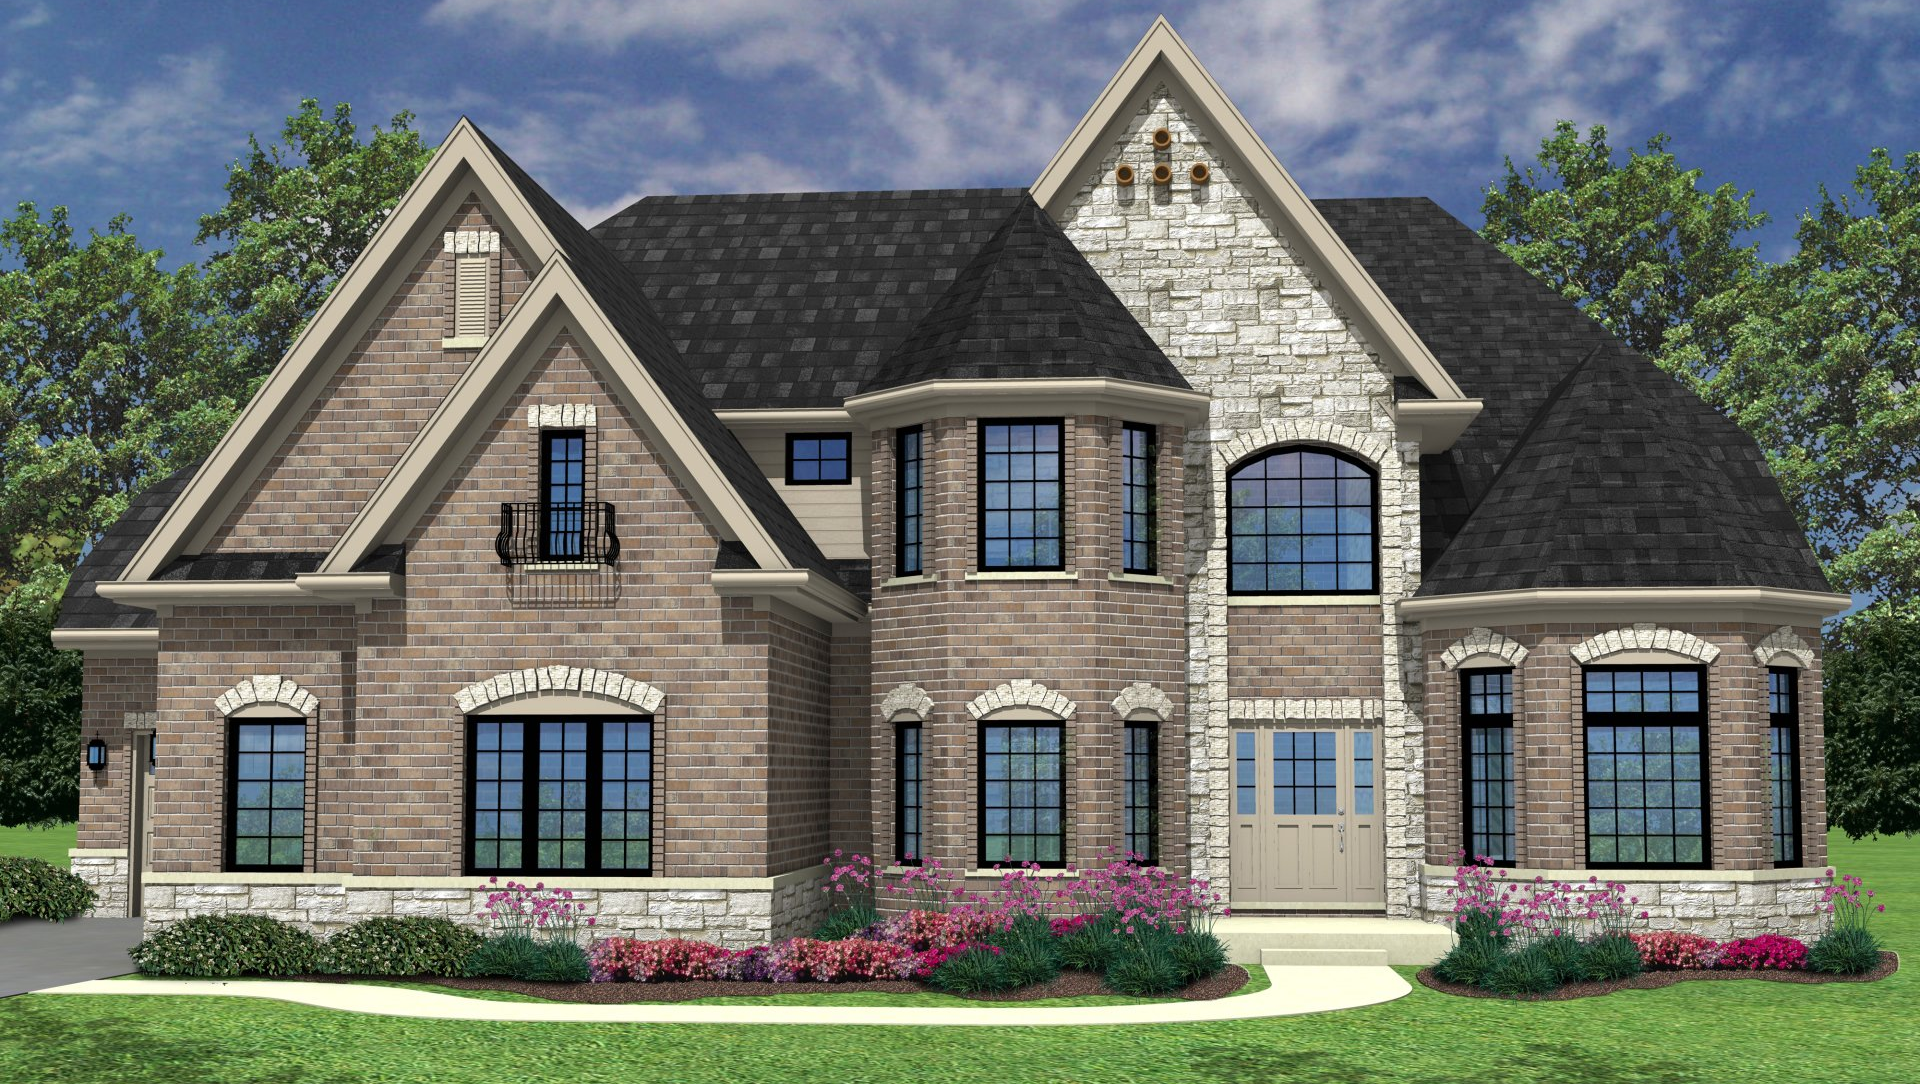 THE PONDS AT ASHWOOD PARK SOUTH | Naperville, IL | King's Court Builders | AVAILABLE HOMES